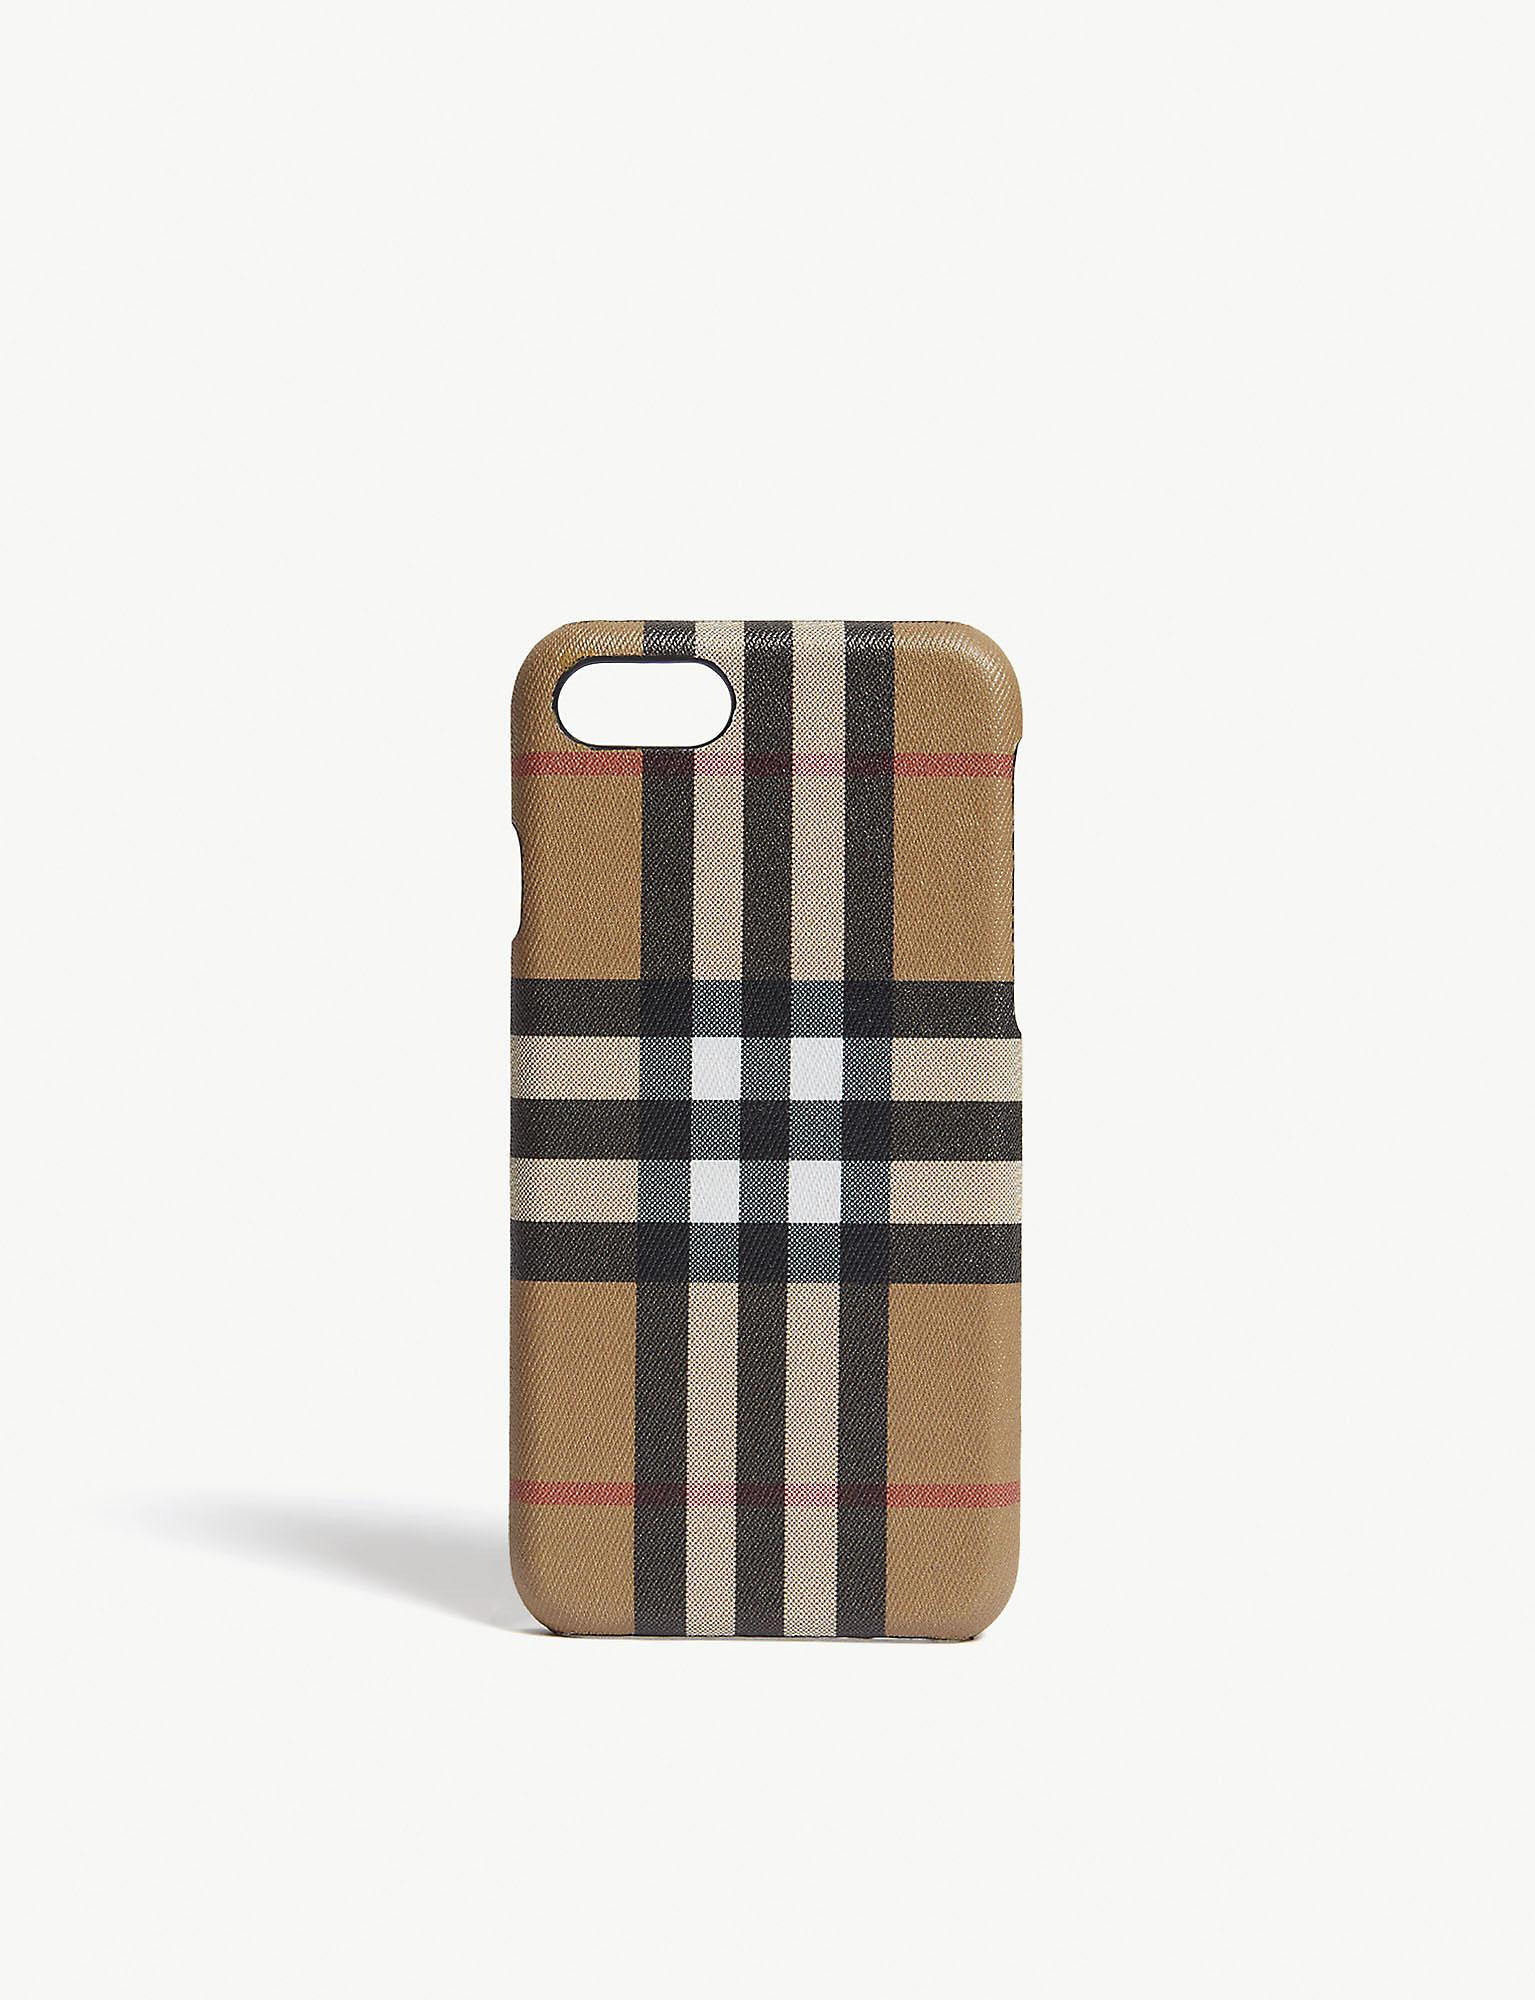 Burberry Iphone 8 Case in Black | Lyst